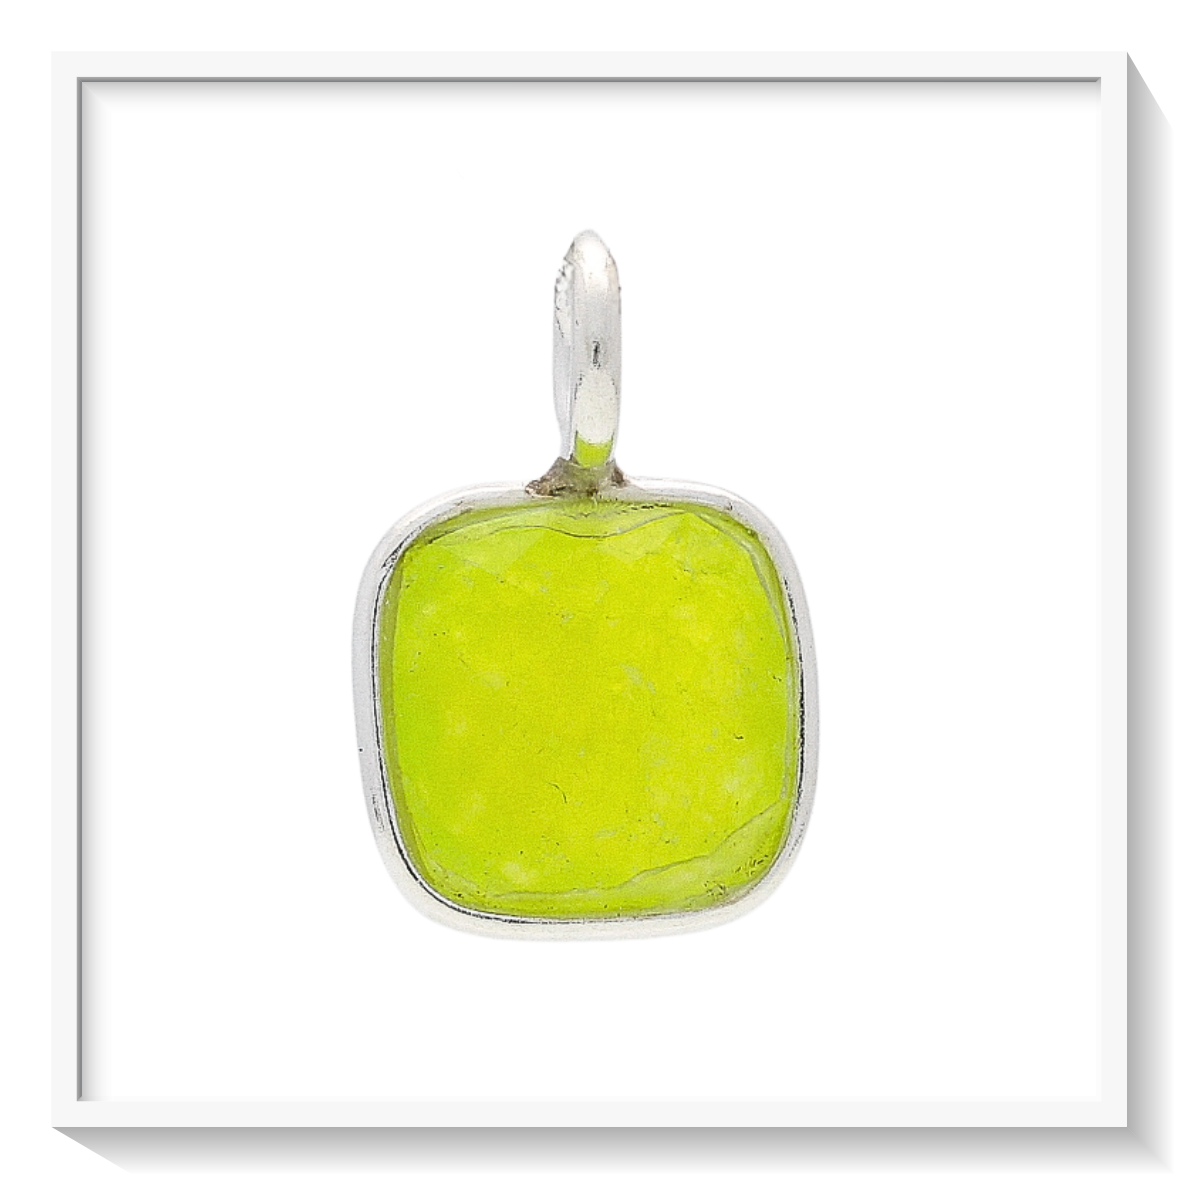 Buy your Lime Quartz Necklace: August Birthstone online now or in store at Forever Gems in Franschhoek, South Africa